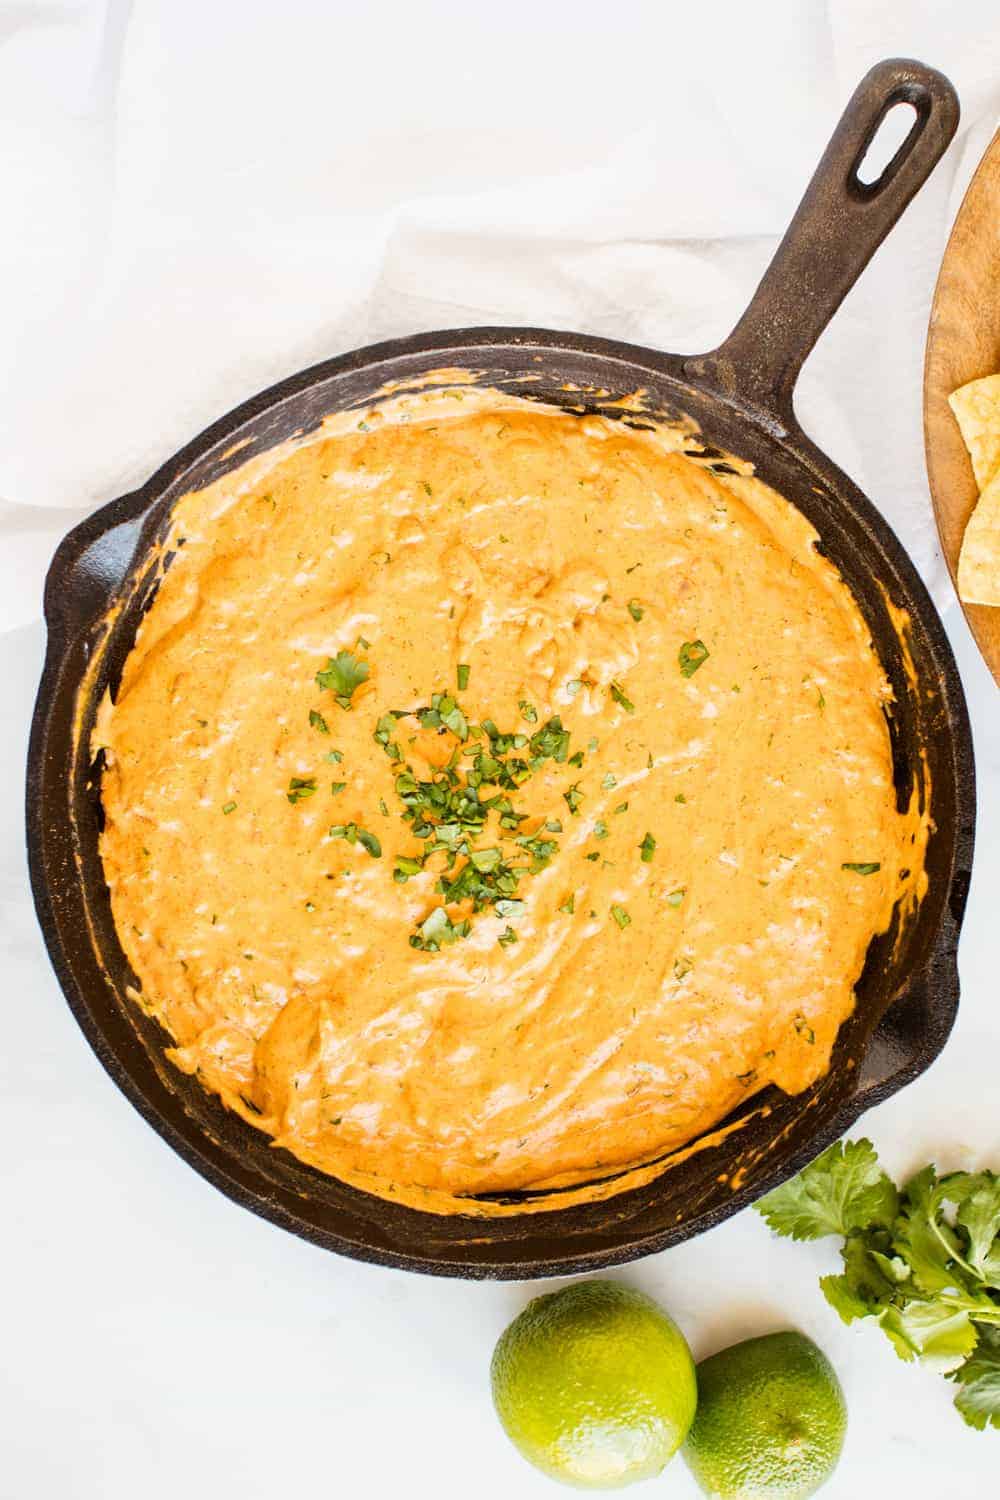 Chili cream cheese dip in a cast iron skillet.